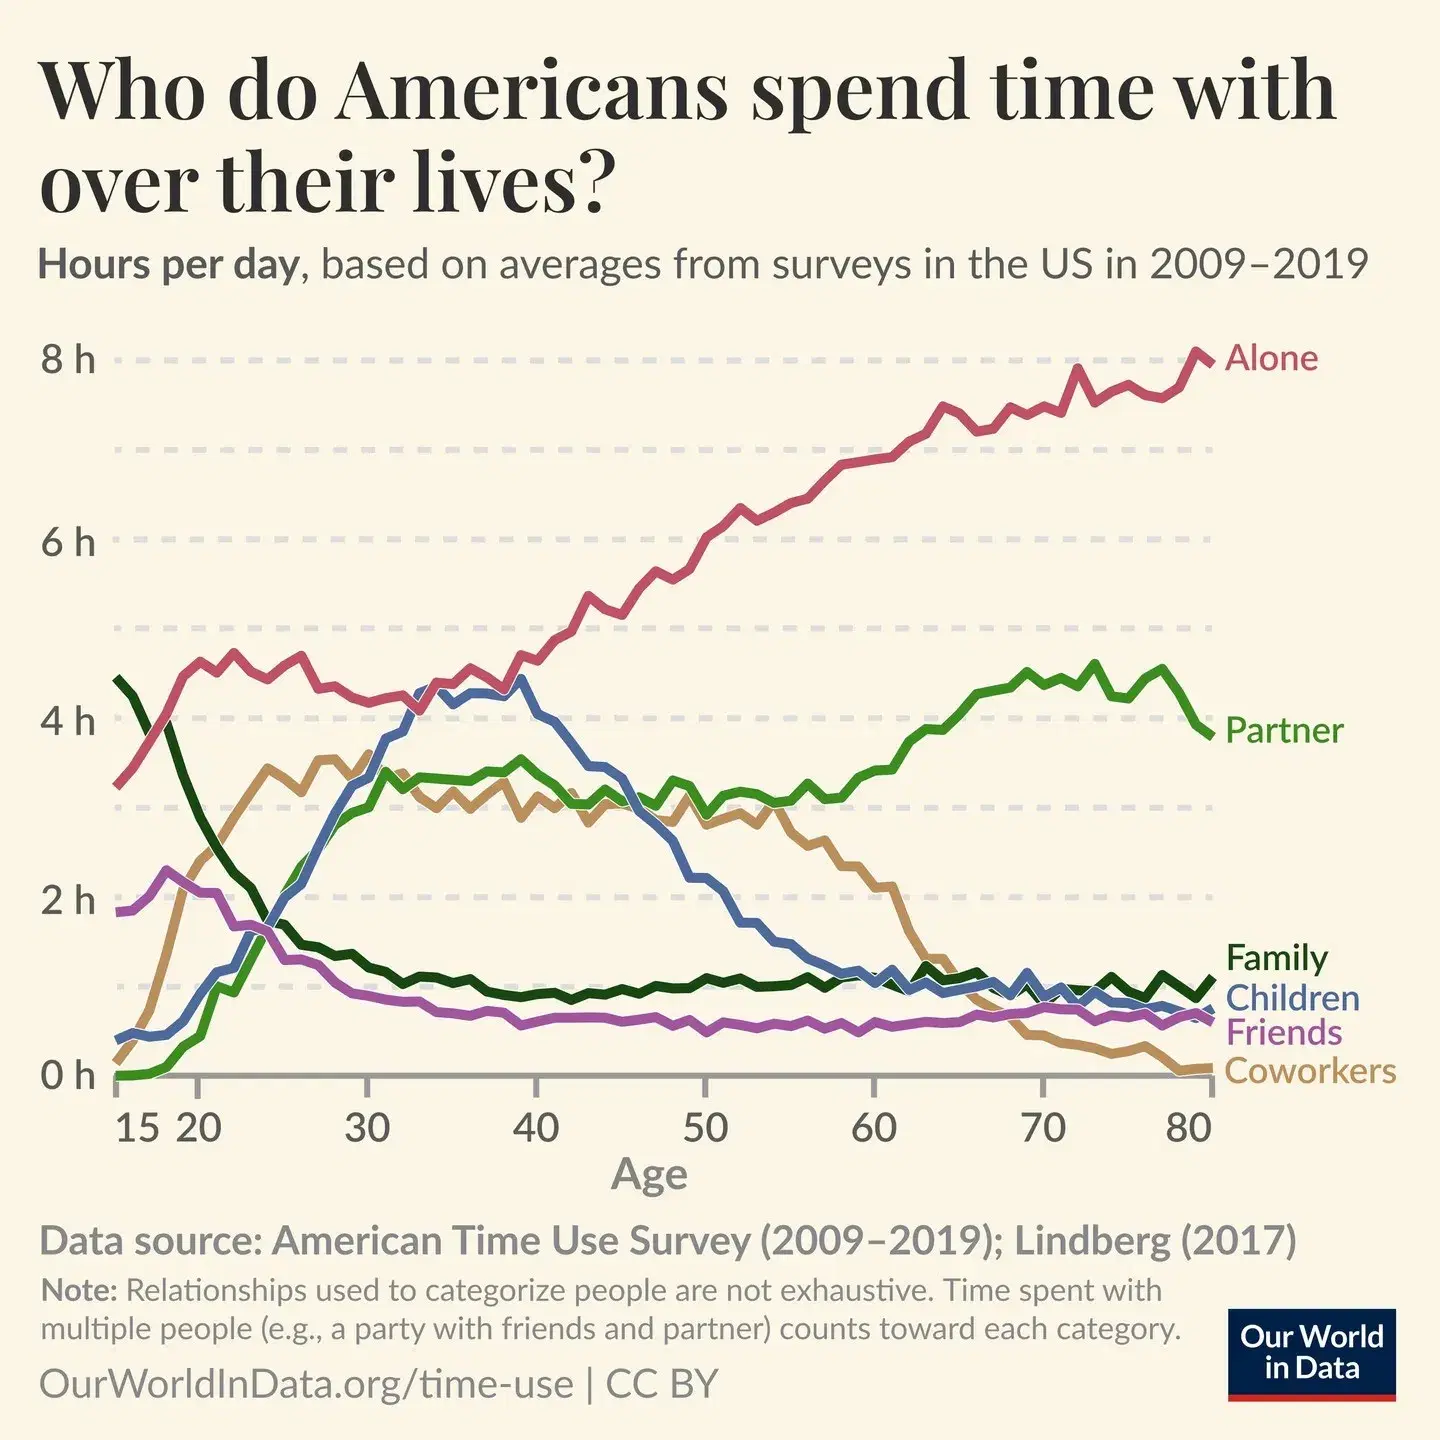 Who Do Americans Spend Their Time With?